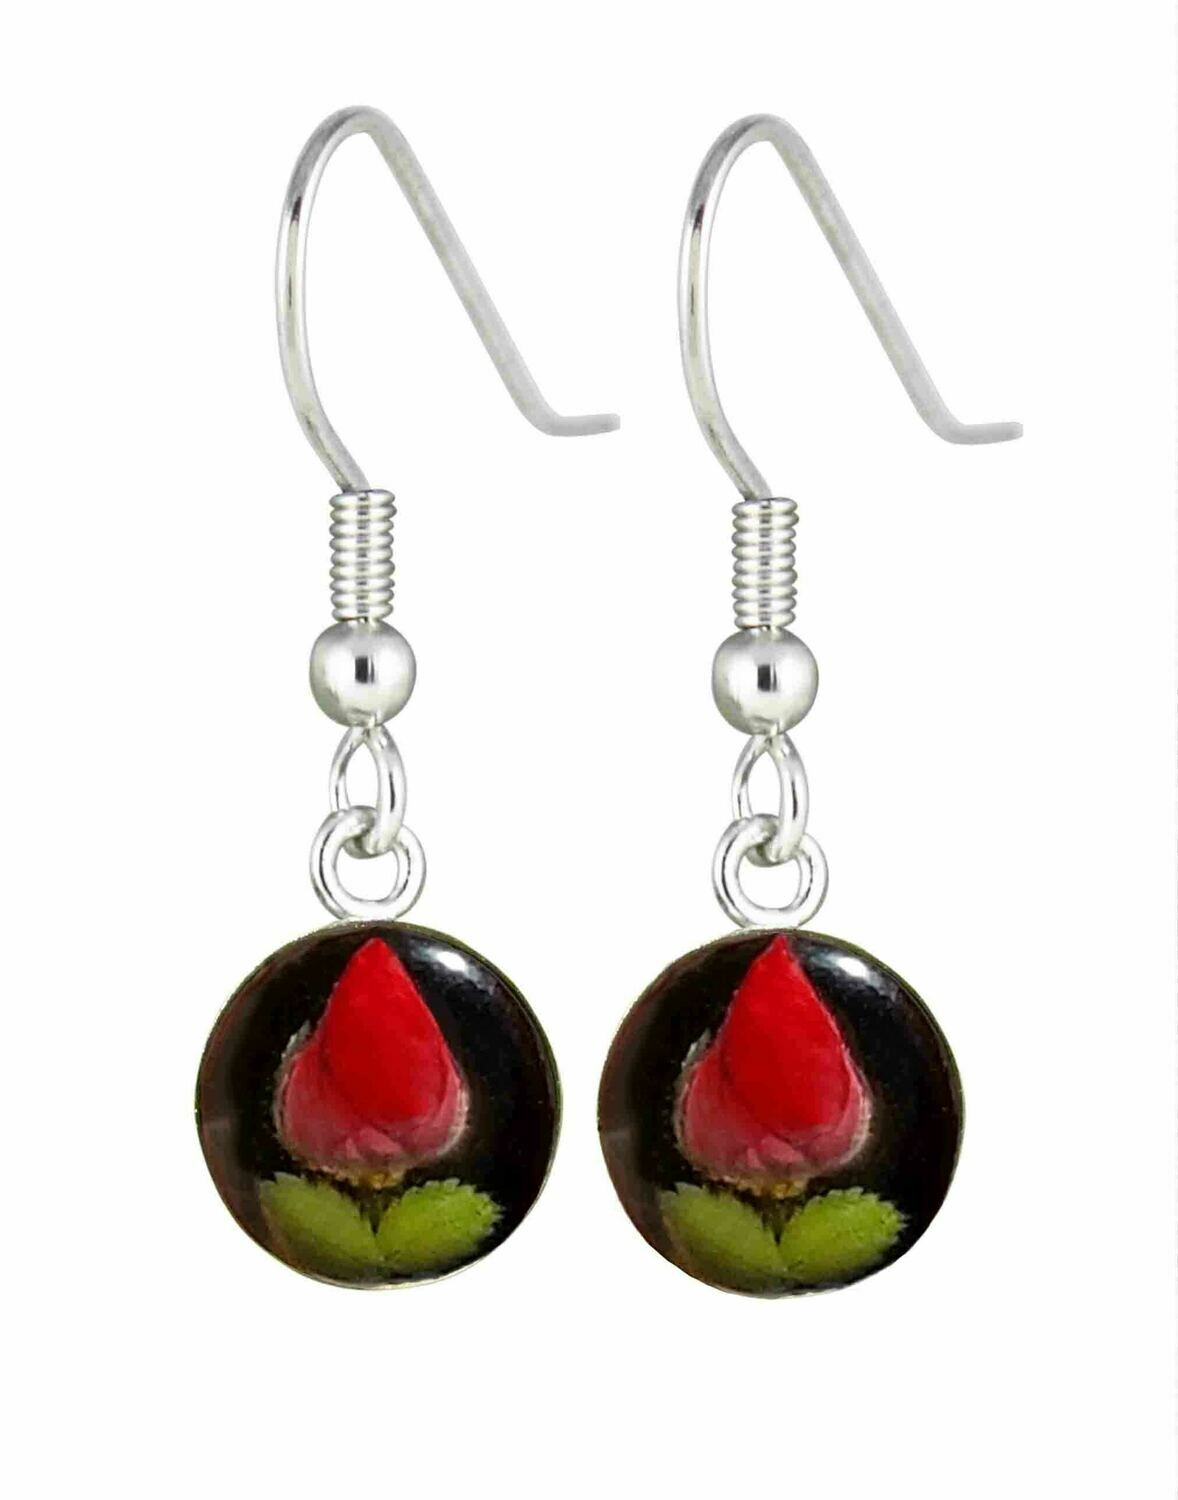 Rose, Small Circle Hanging Earrings, Black Background.